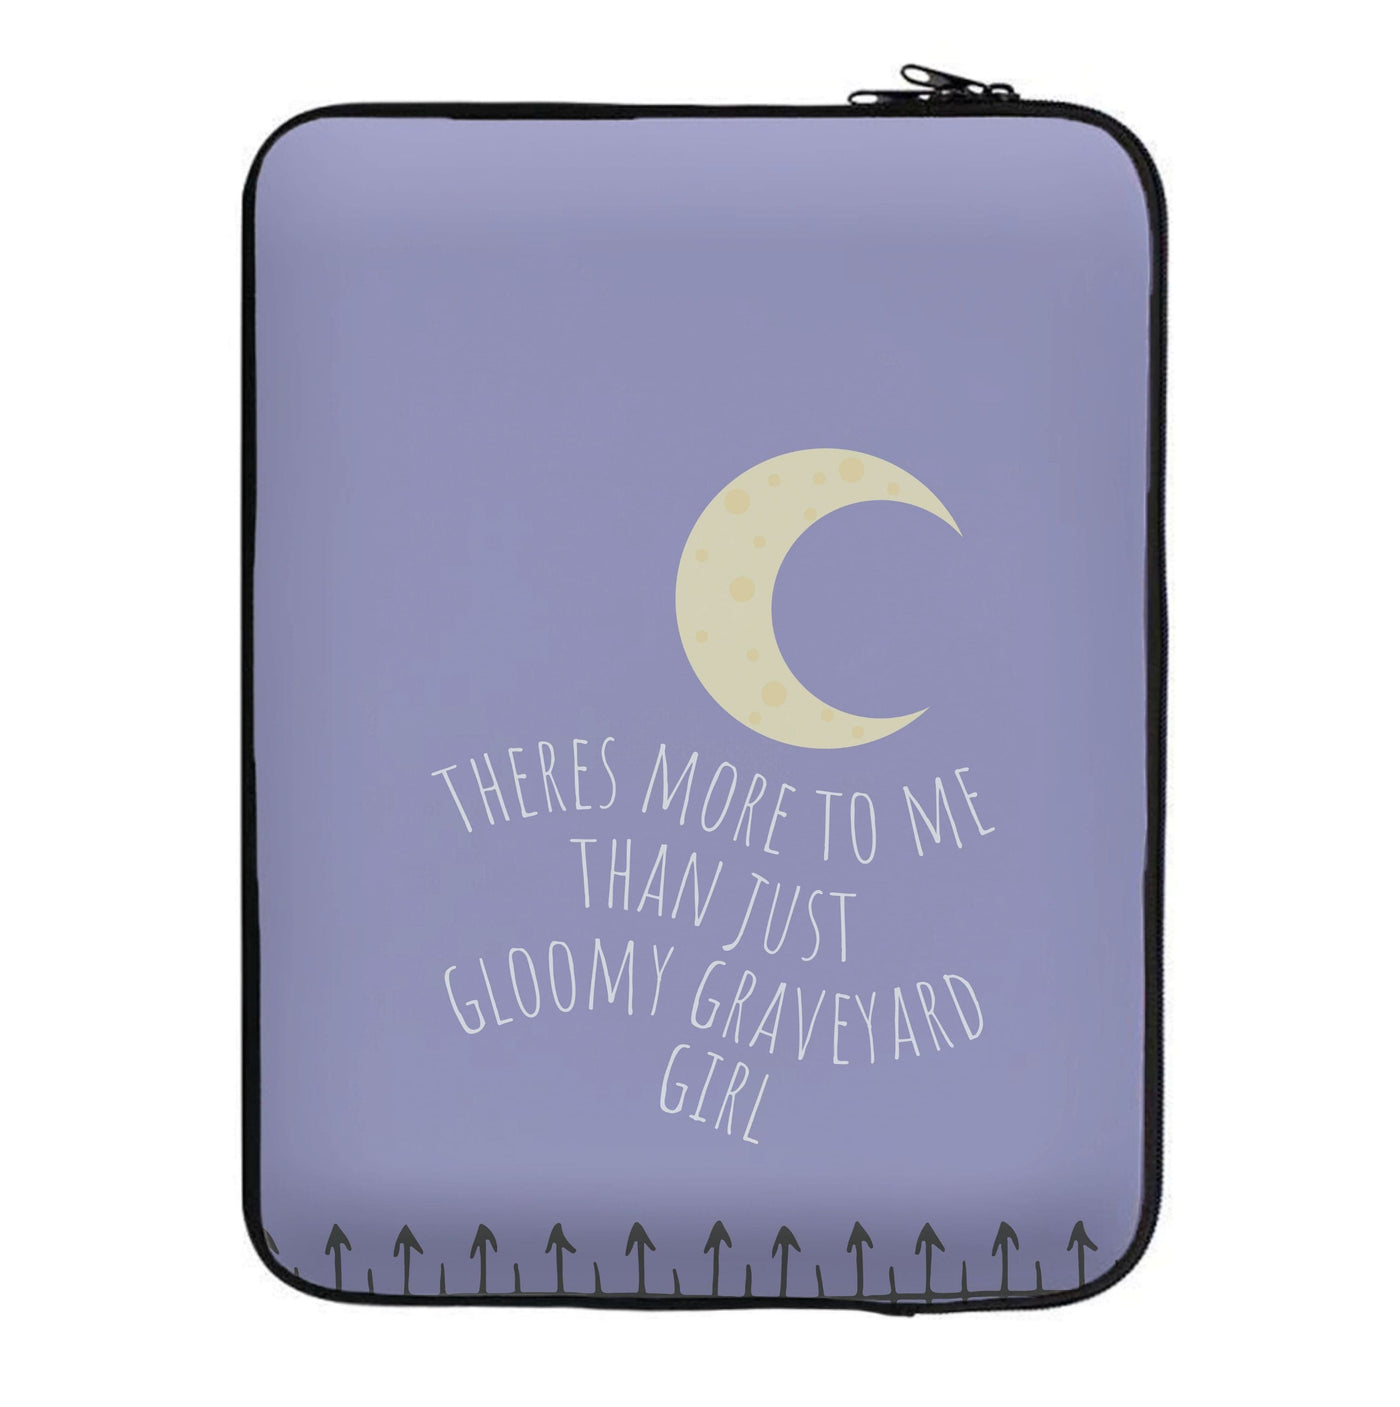 Theres More To Me - TV Quotes Laptop Sleeve